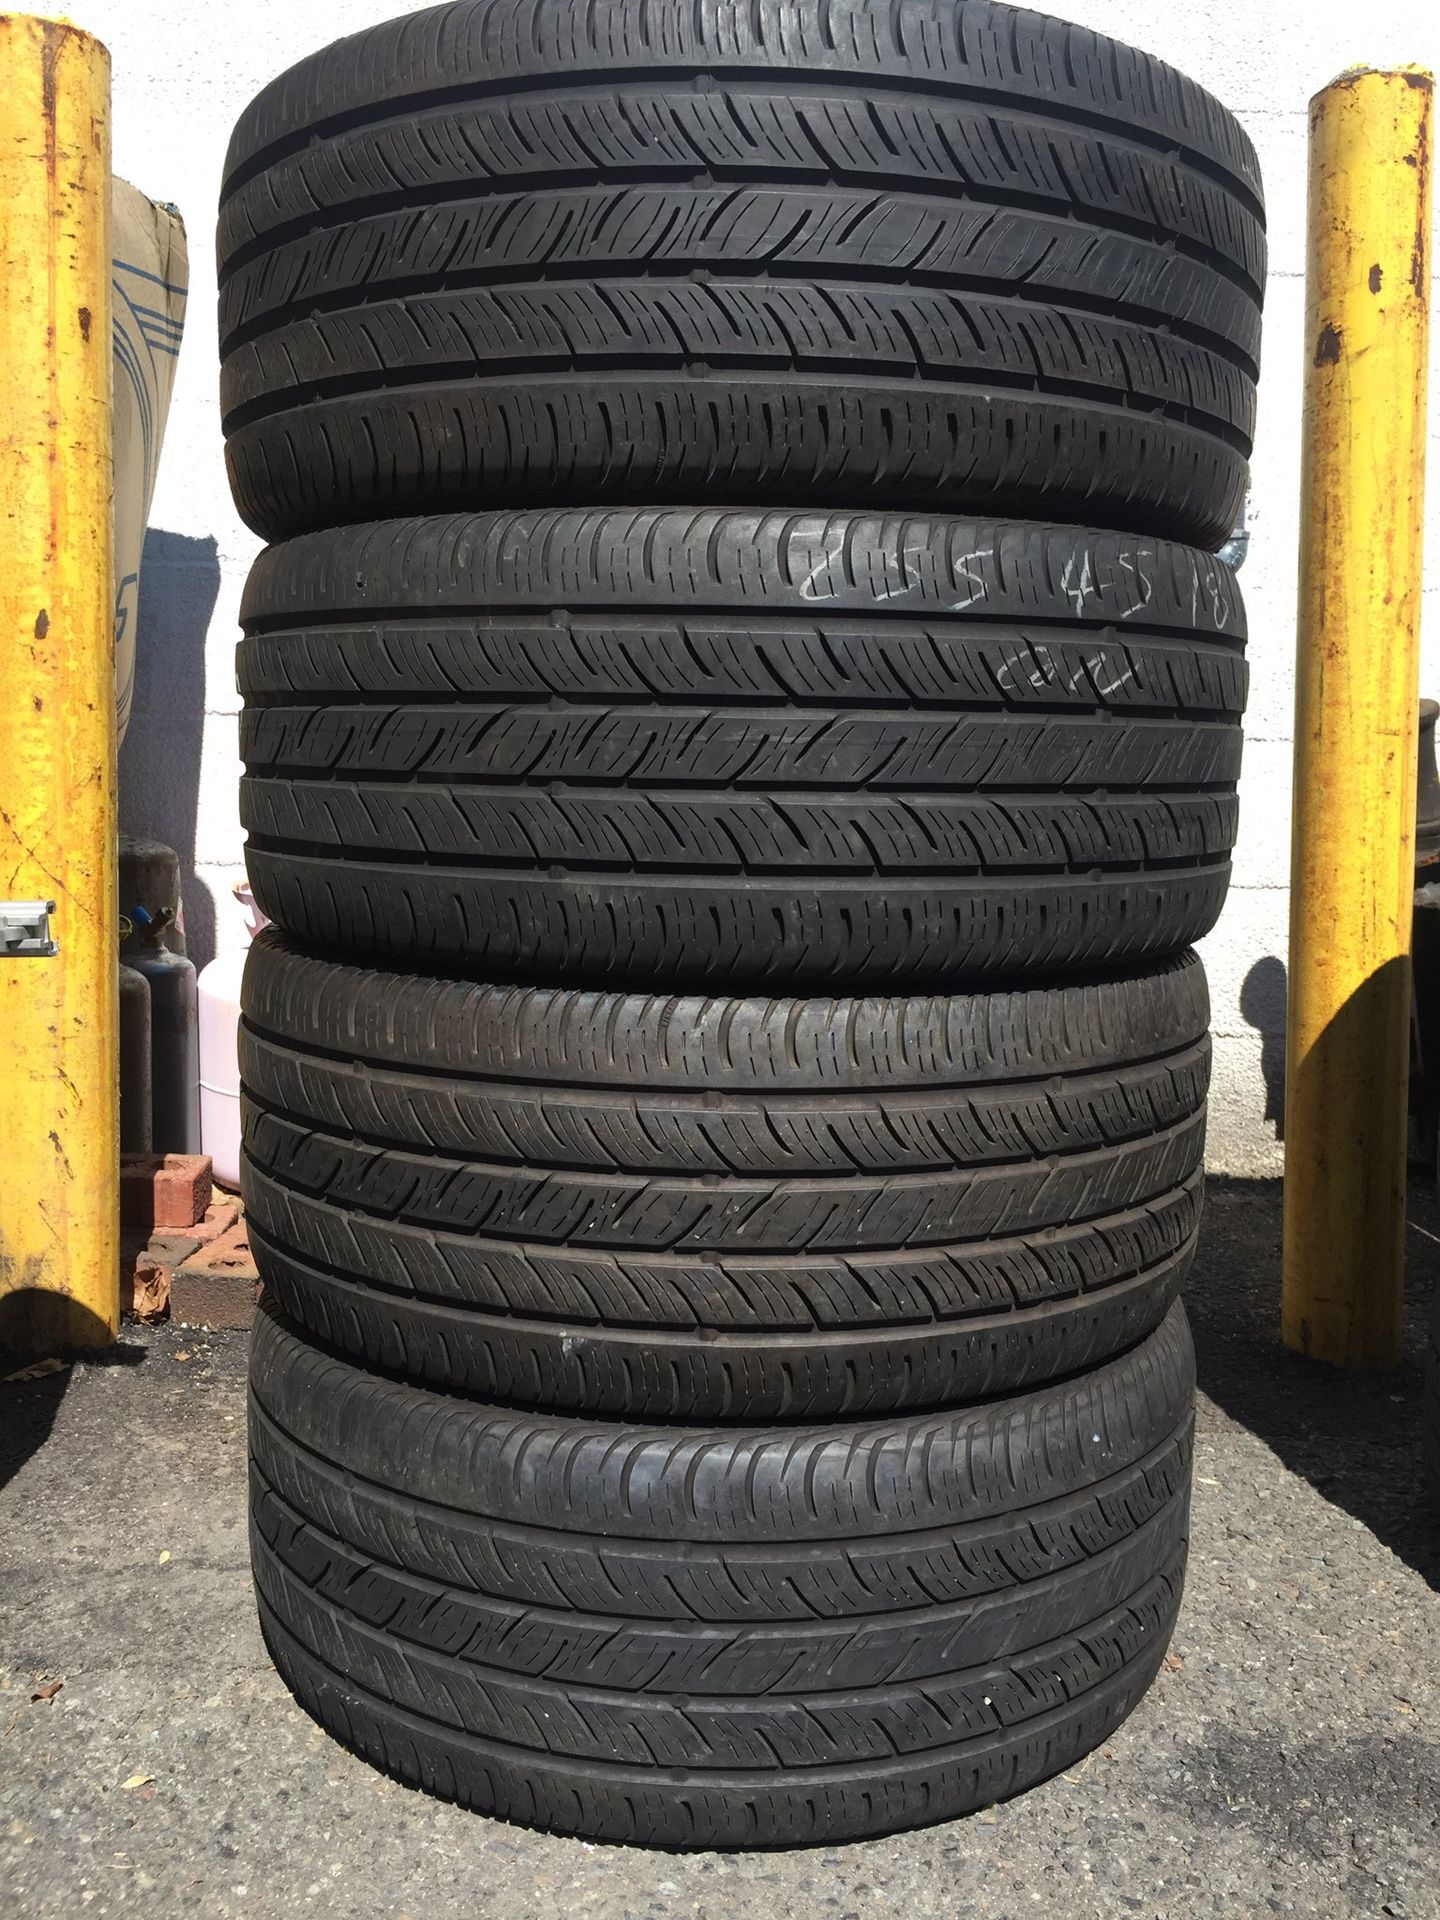 255/45/18 continental set of used tires in great condition 70% tread 225$ for 4 . Installation balance and alignment available. Road force balance a